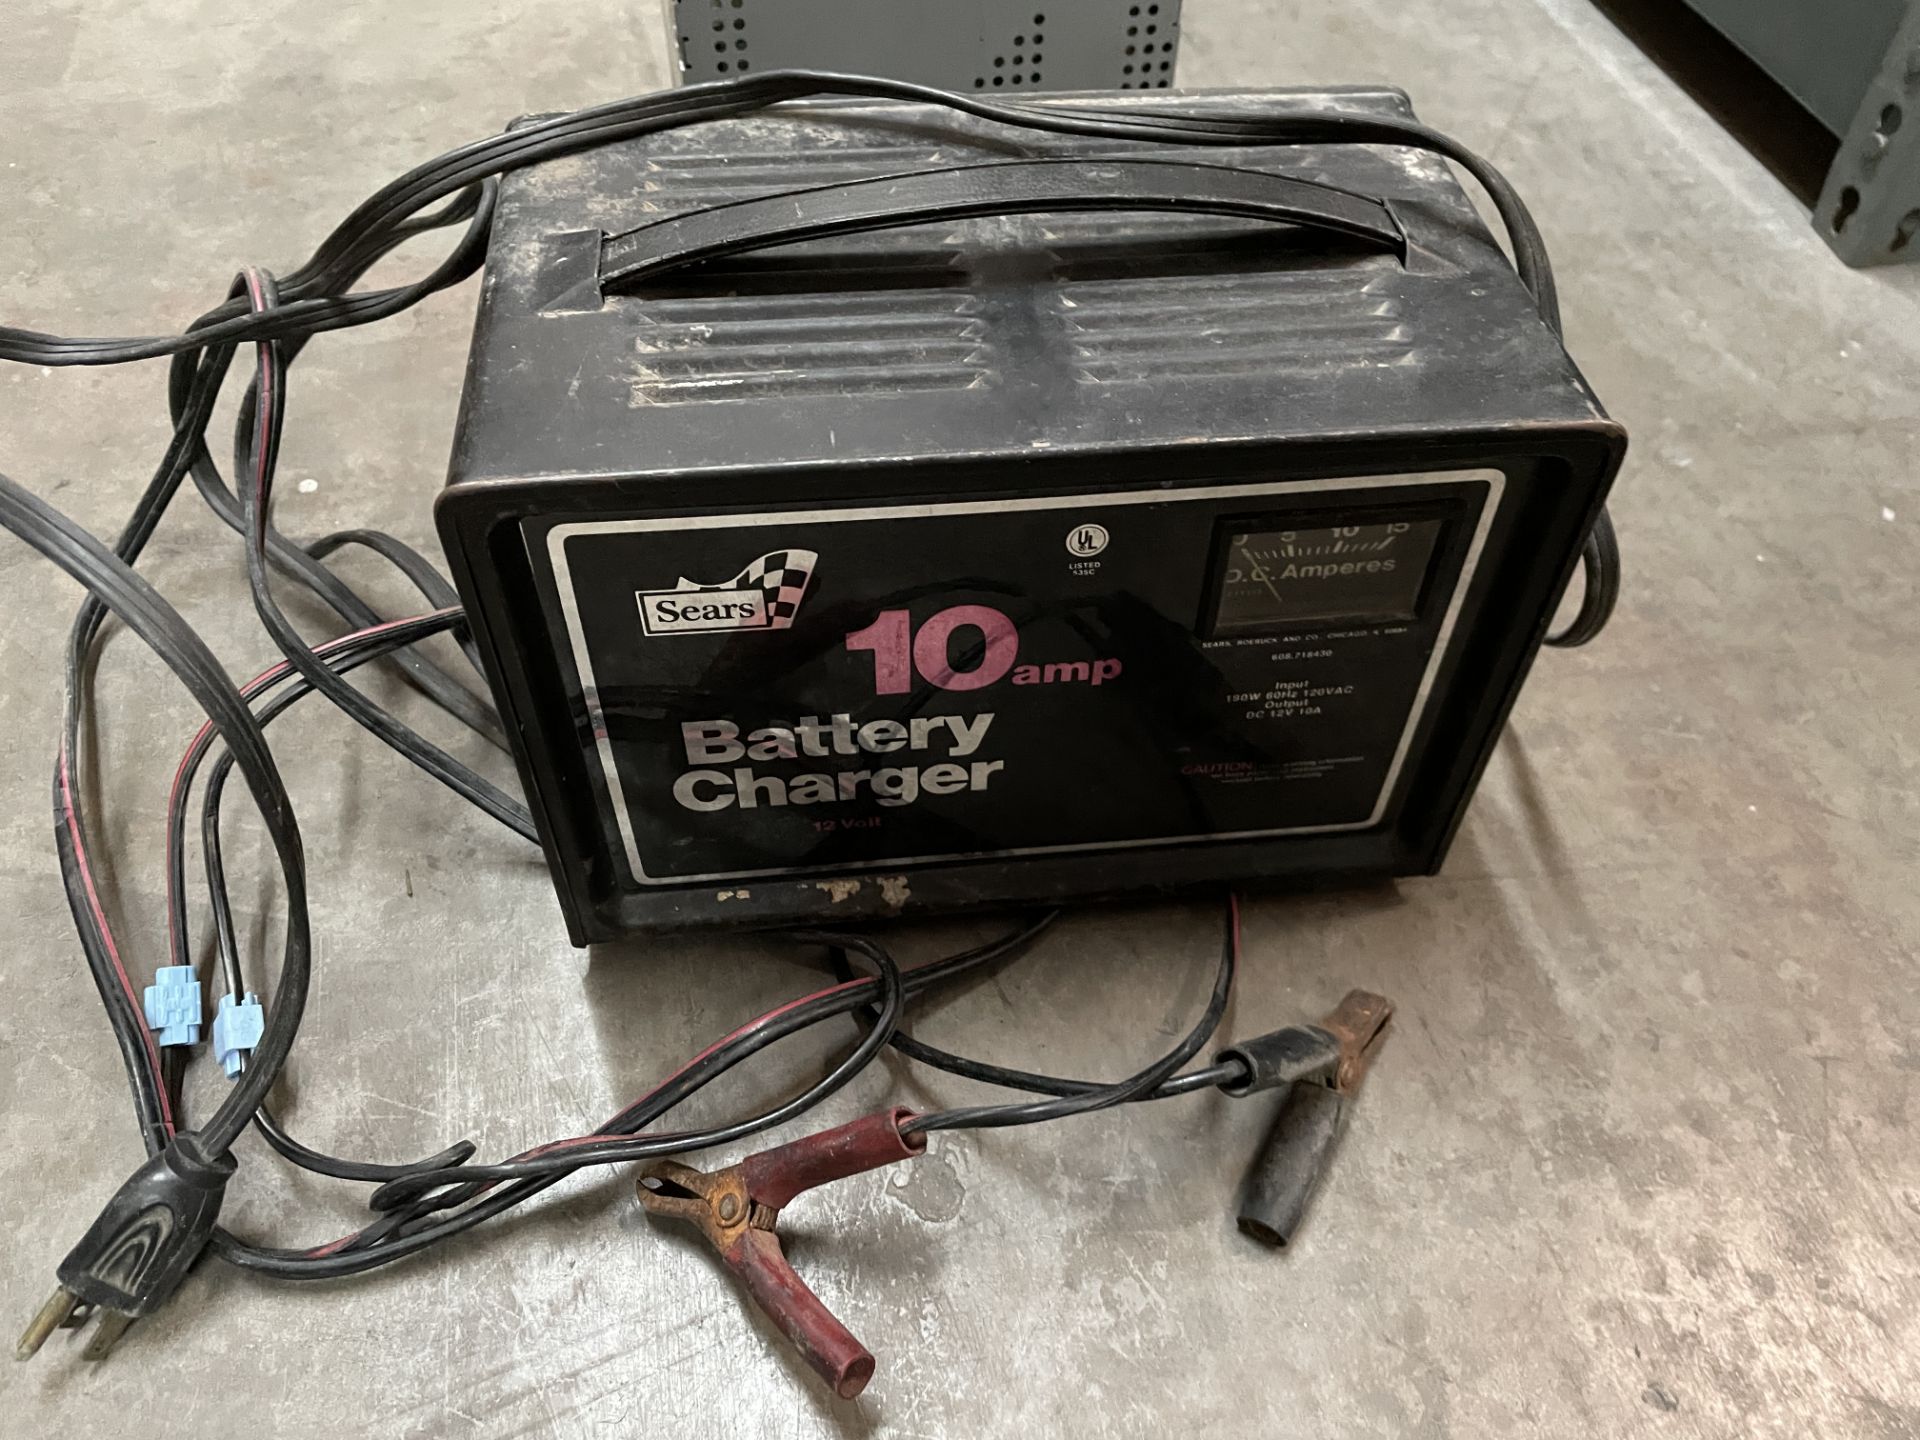 Battery Charger AND Car Radio Unit - Image 5 of 7